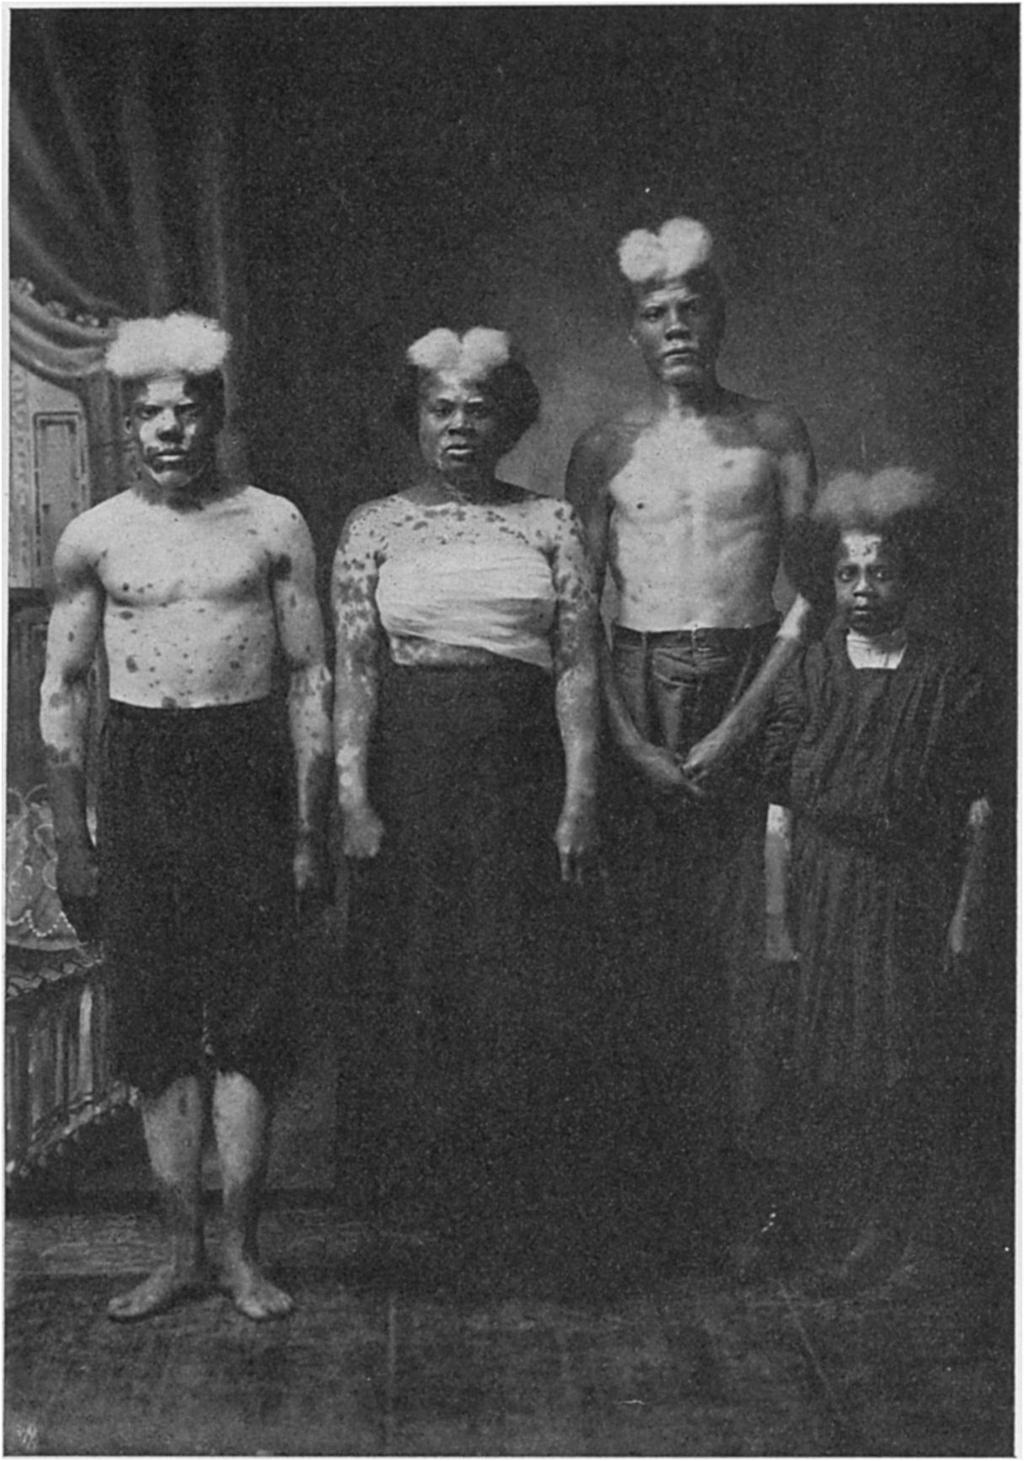 No. 553] A FAMILY OF SPOTTED NEGROES 51 L u _A. _, FIG. 1. Mrs. Eliza D., her sons Jim and Robert (the taller one) and daughter, Lillie. Photographed 1910.